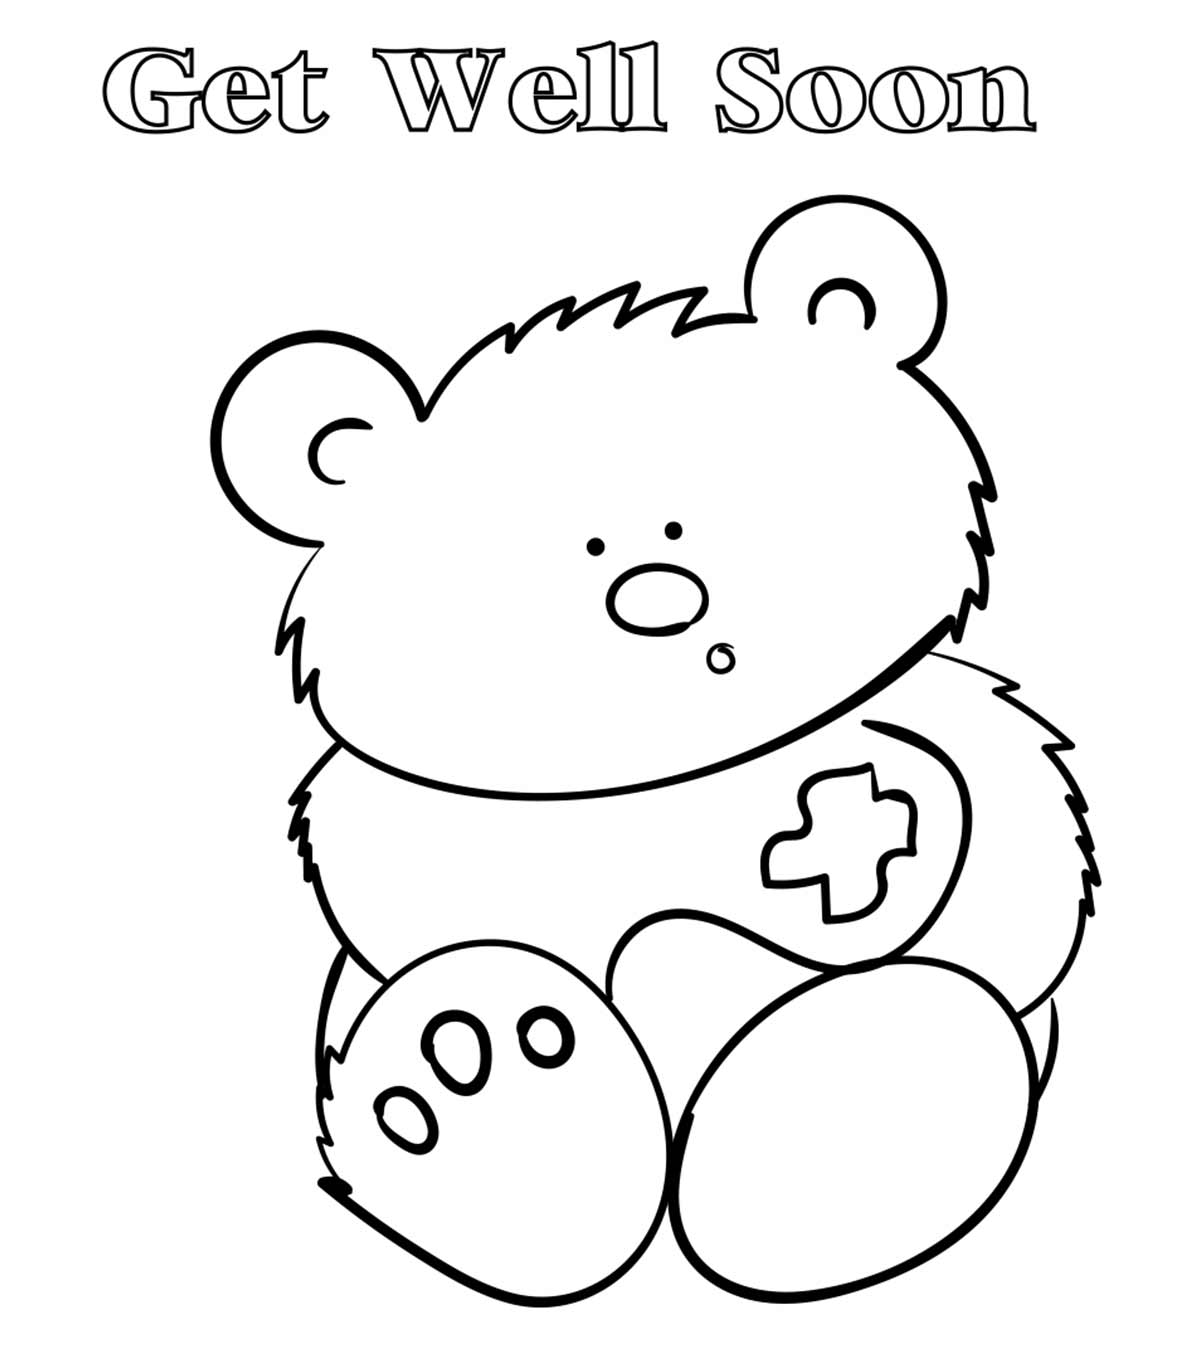 Top 25 Get Well Soon Coloring Pages To Keep Your Toddler Busy